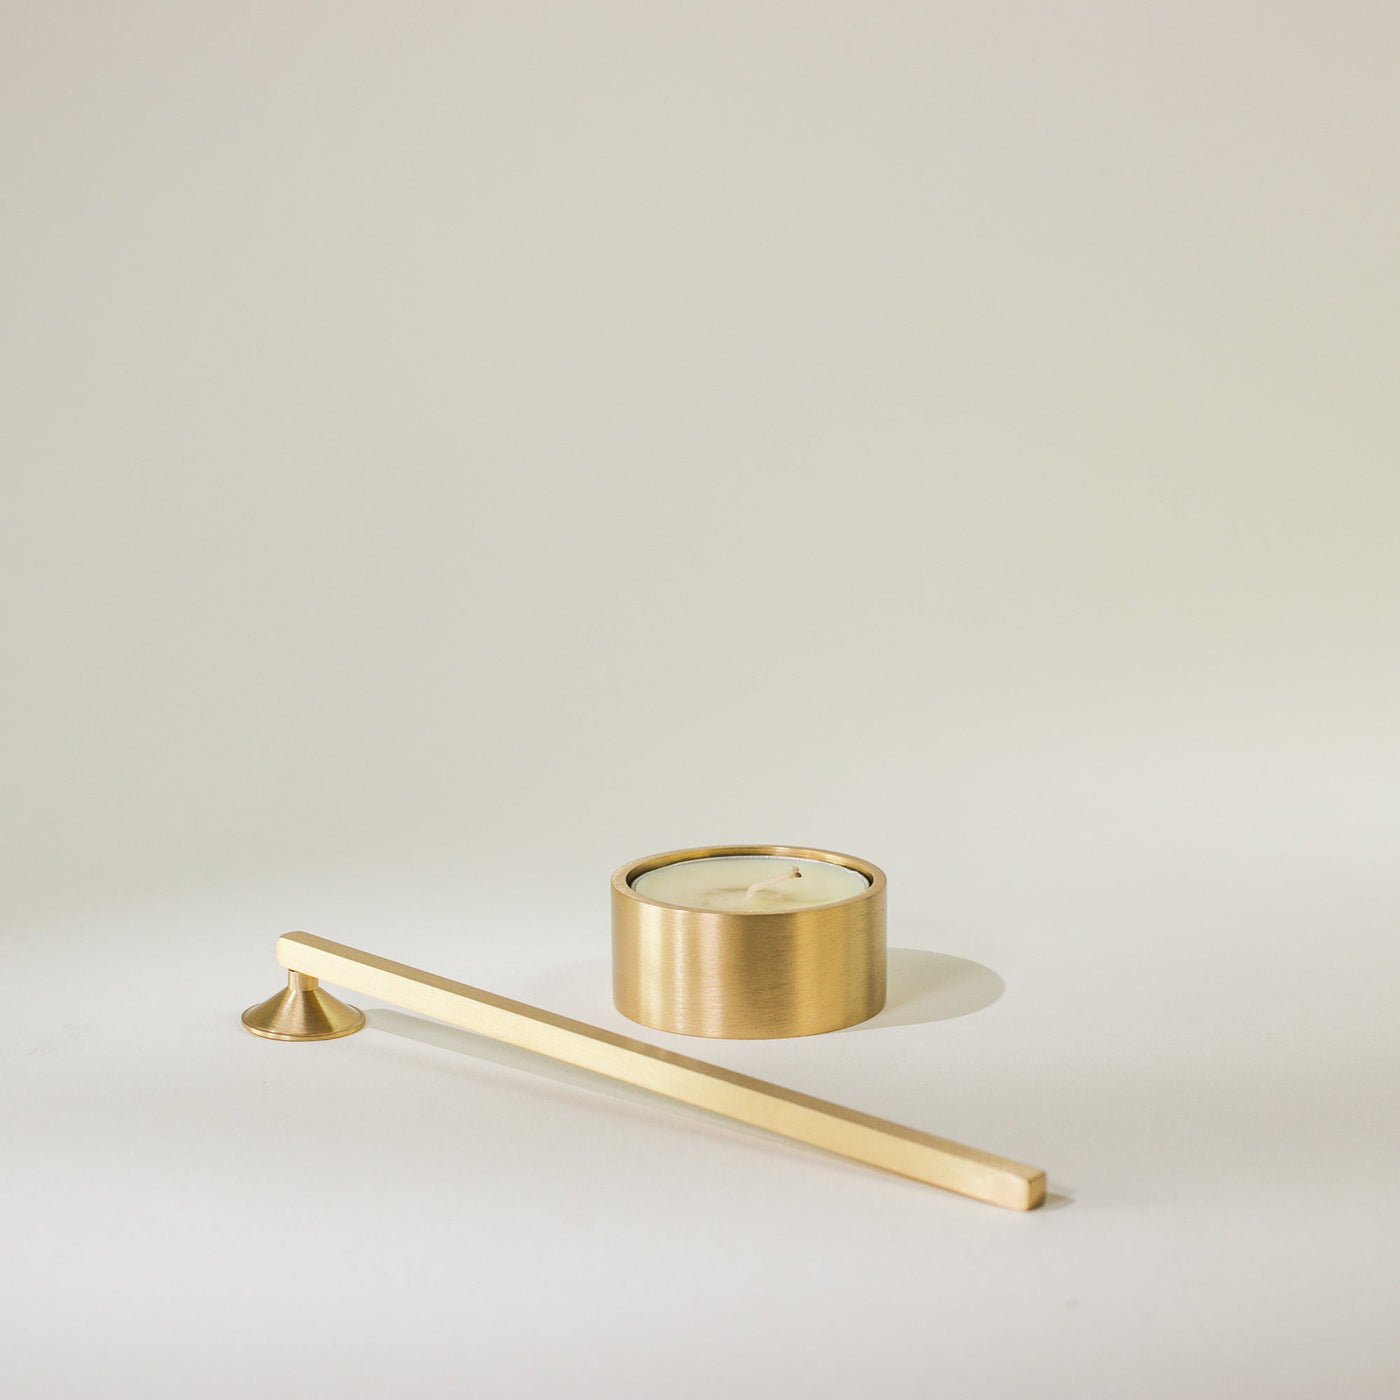 Brass Tealight Holder with Candle Snuffer - Set of 2